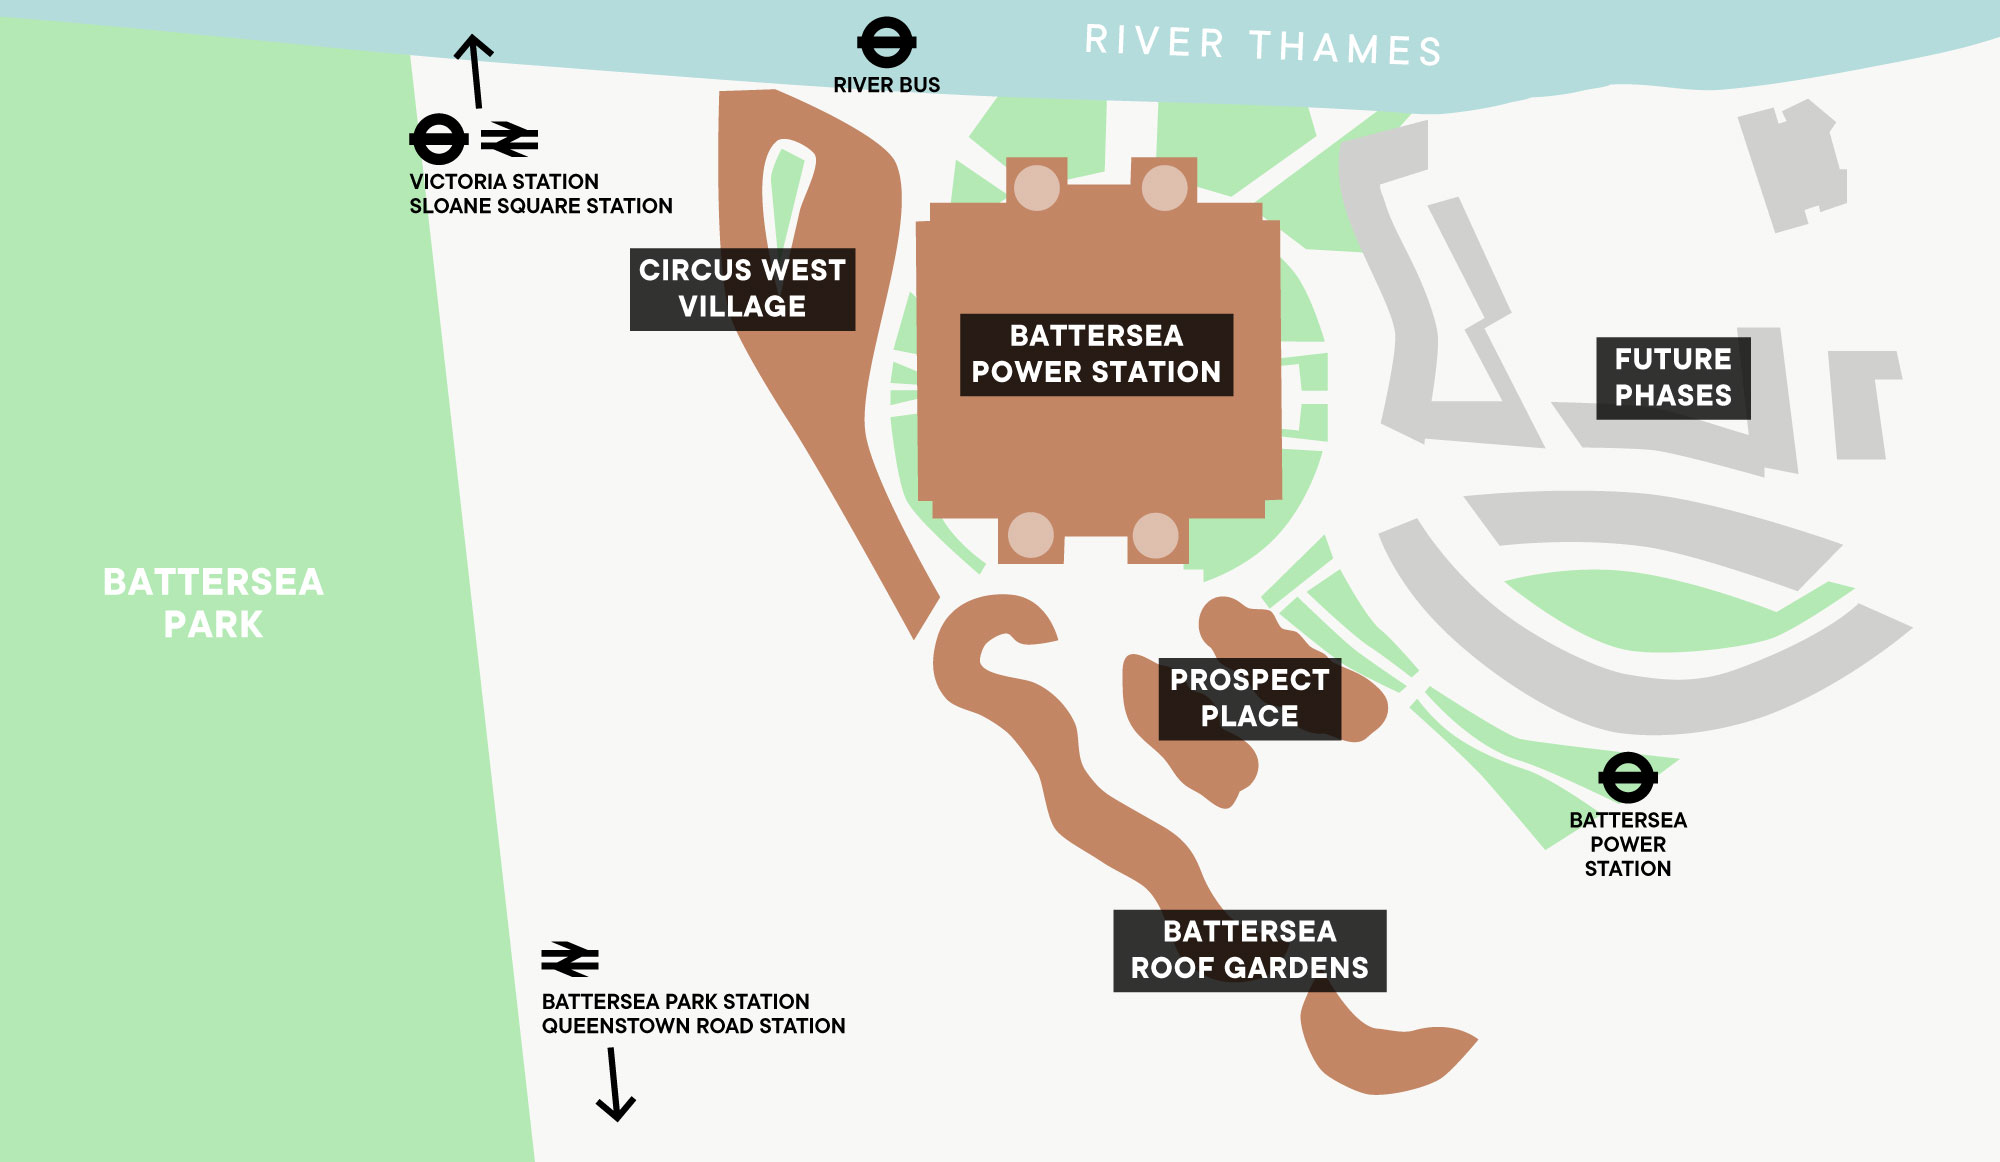 An illustration of the development buildings at Battersea Power Station